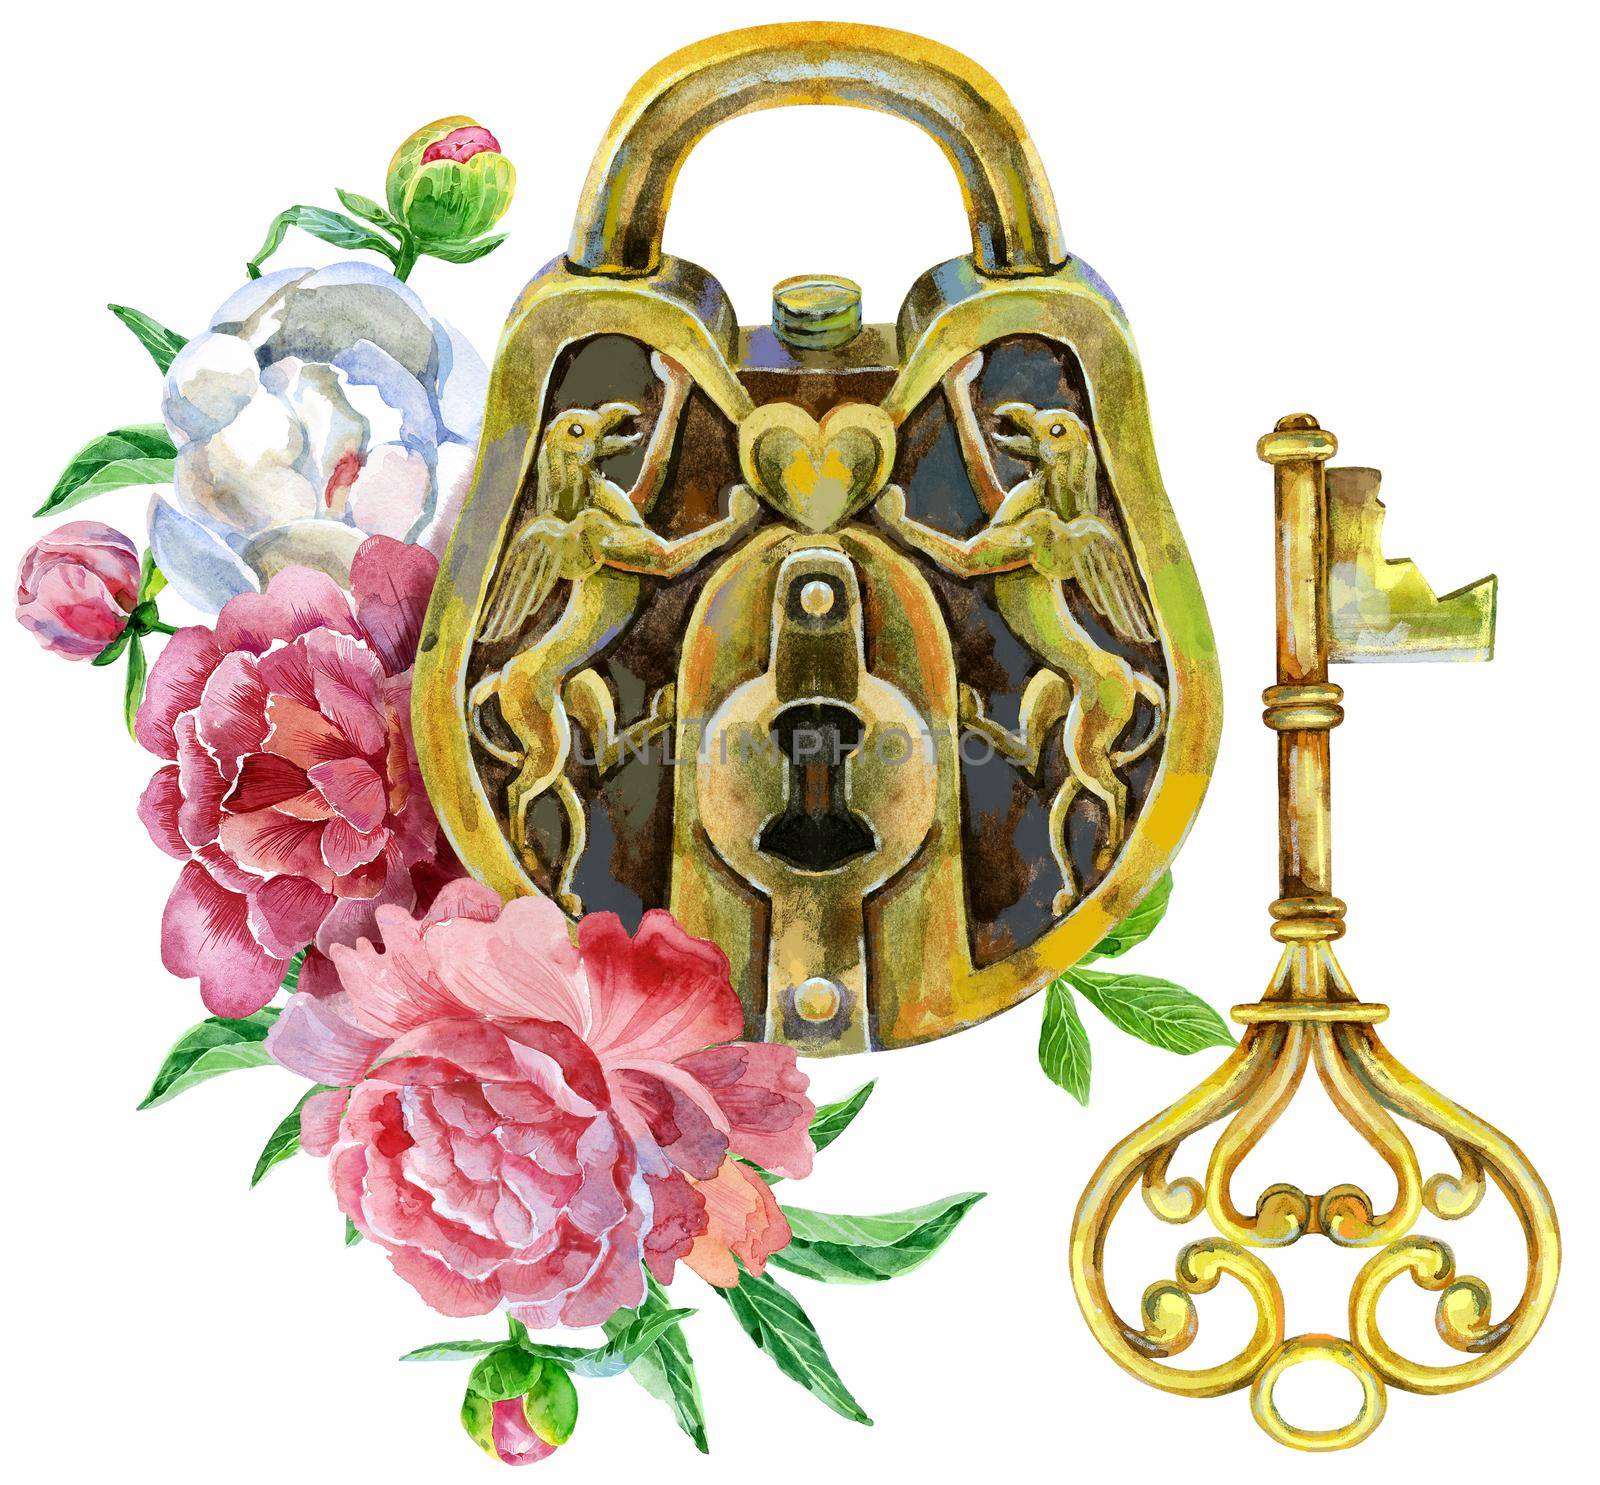 Golden padlock with key and peonies. Watercolor illustration on a white background